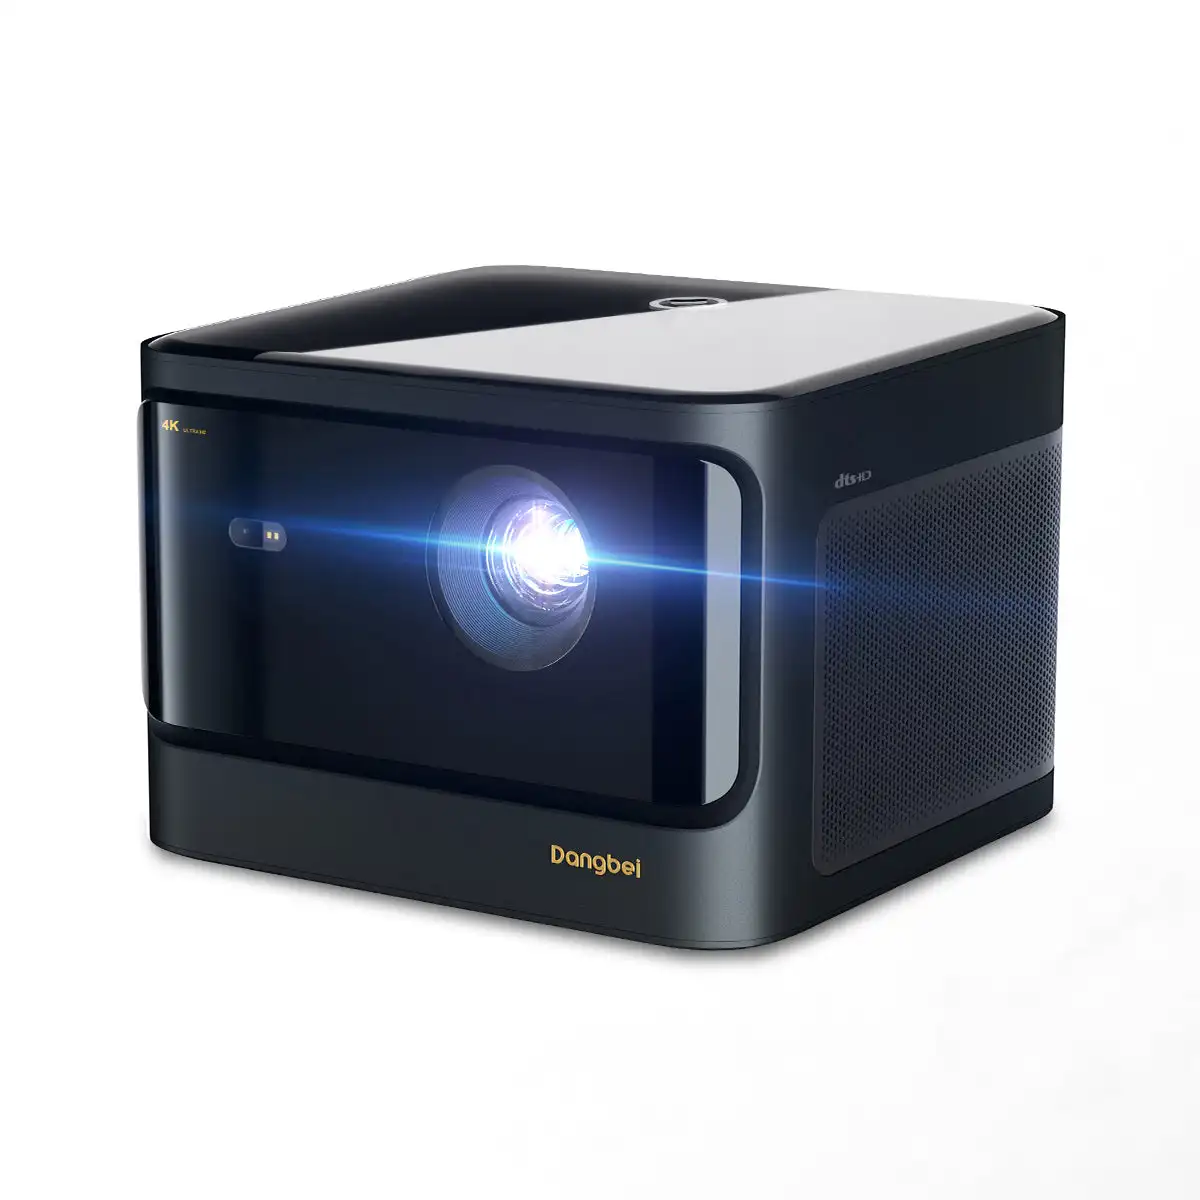 temperament geloof naaimachine Dangbei Mars Pro 4k Laser Projector Home Theater 3200 Ansi Android 3d Show  Projector 4g+128g Beamer Dangbei Global Version - Buy Dangbei Mars  Pro,Dangbei 4k Projector,Dangbei Global Verison Product on Alibaba.com